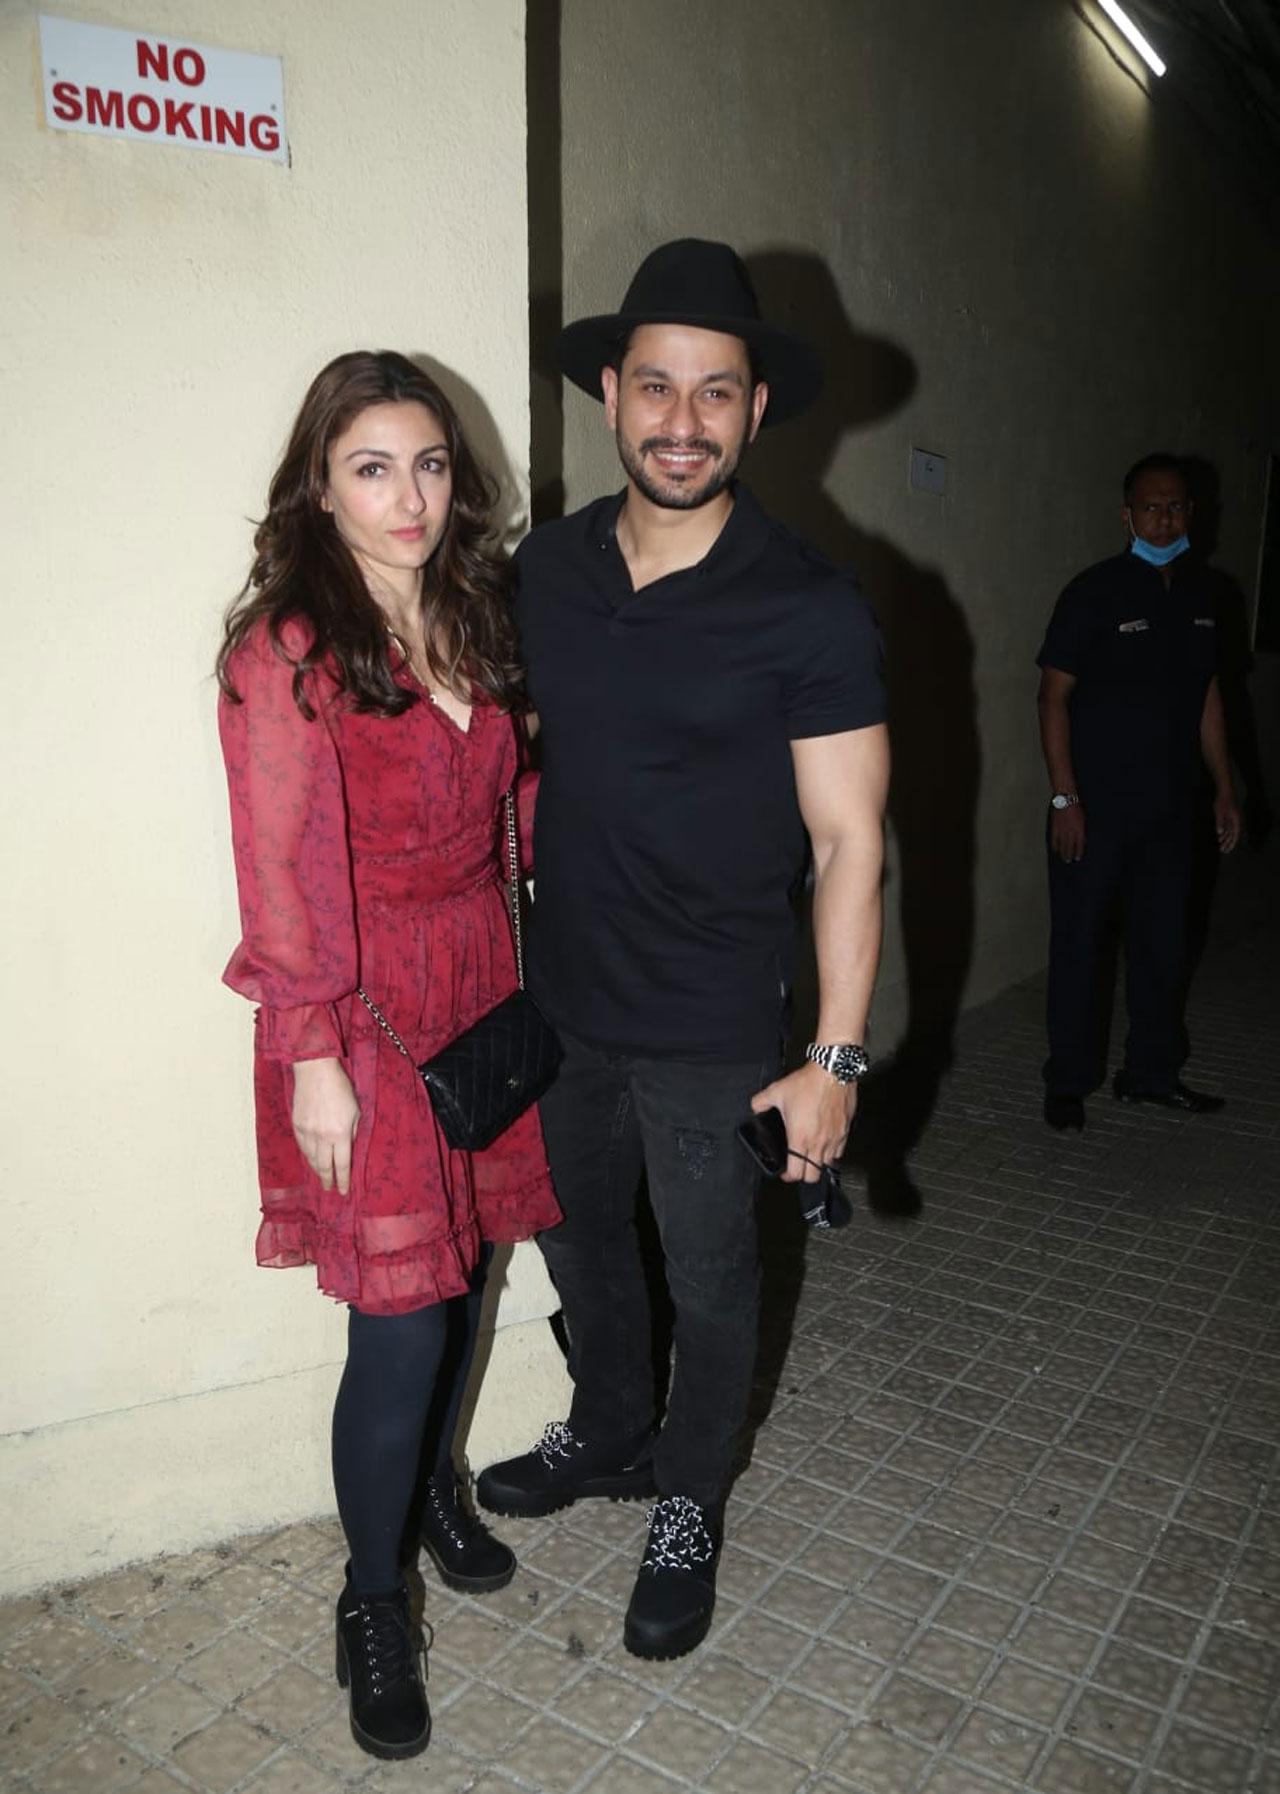 Soha Ali Khan, Kunal Khemu too kept it stylish at the screening of the film. The duo was seen in films like 99 and Go Goa Gone where the actress had a cameo. The movie directed by Harshavardhan Kulkarni, is one of the most eagerly awaited family entertainers releasing on 11th February in cinemas.